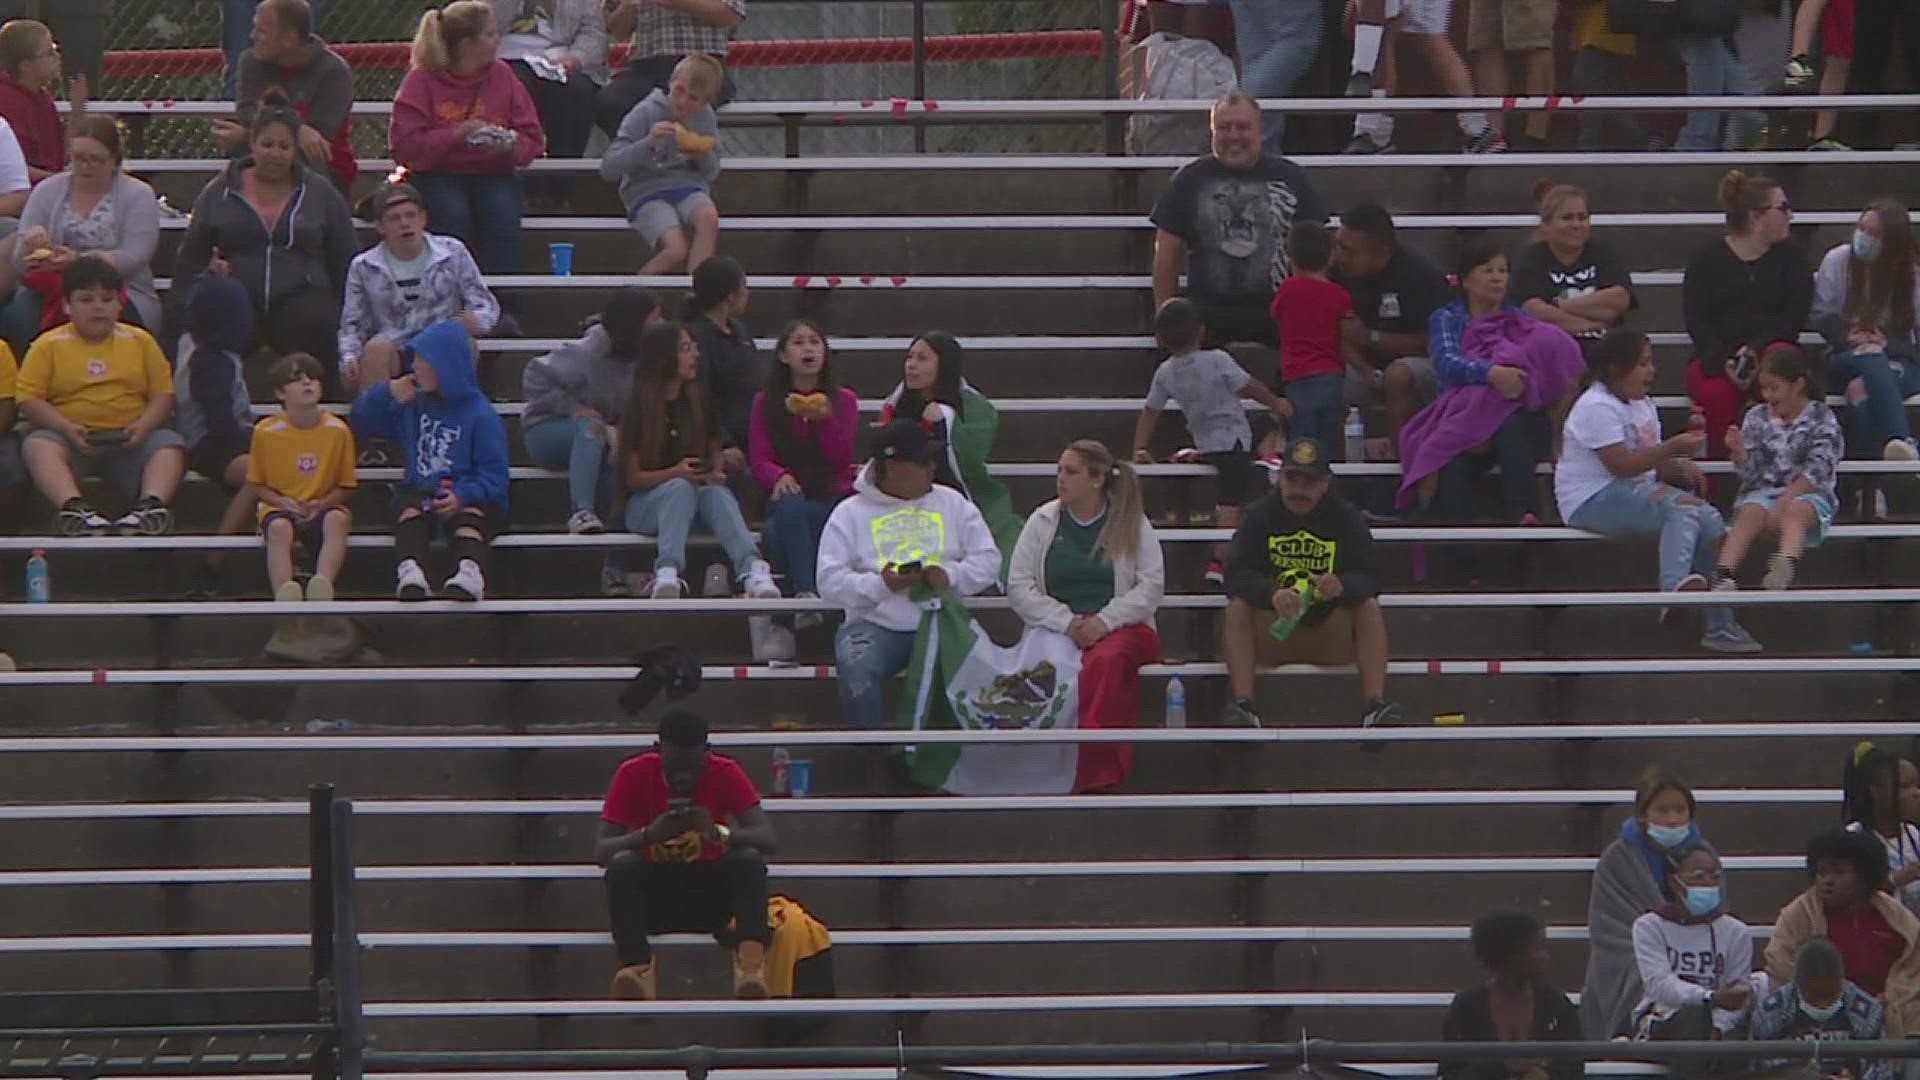 Rock Island High School students from different nationalities brought their flags at a soccer game to support student athlete, Gabriel Abarran.